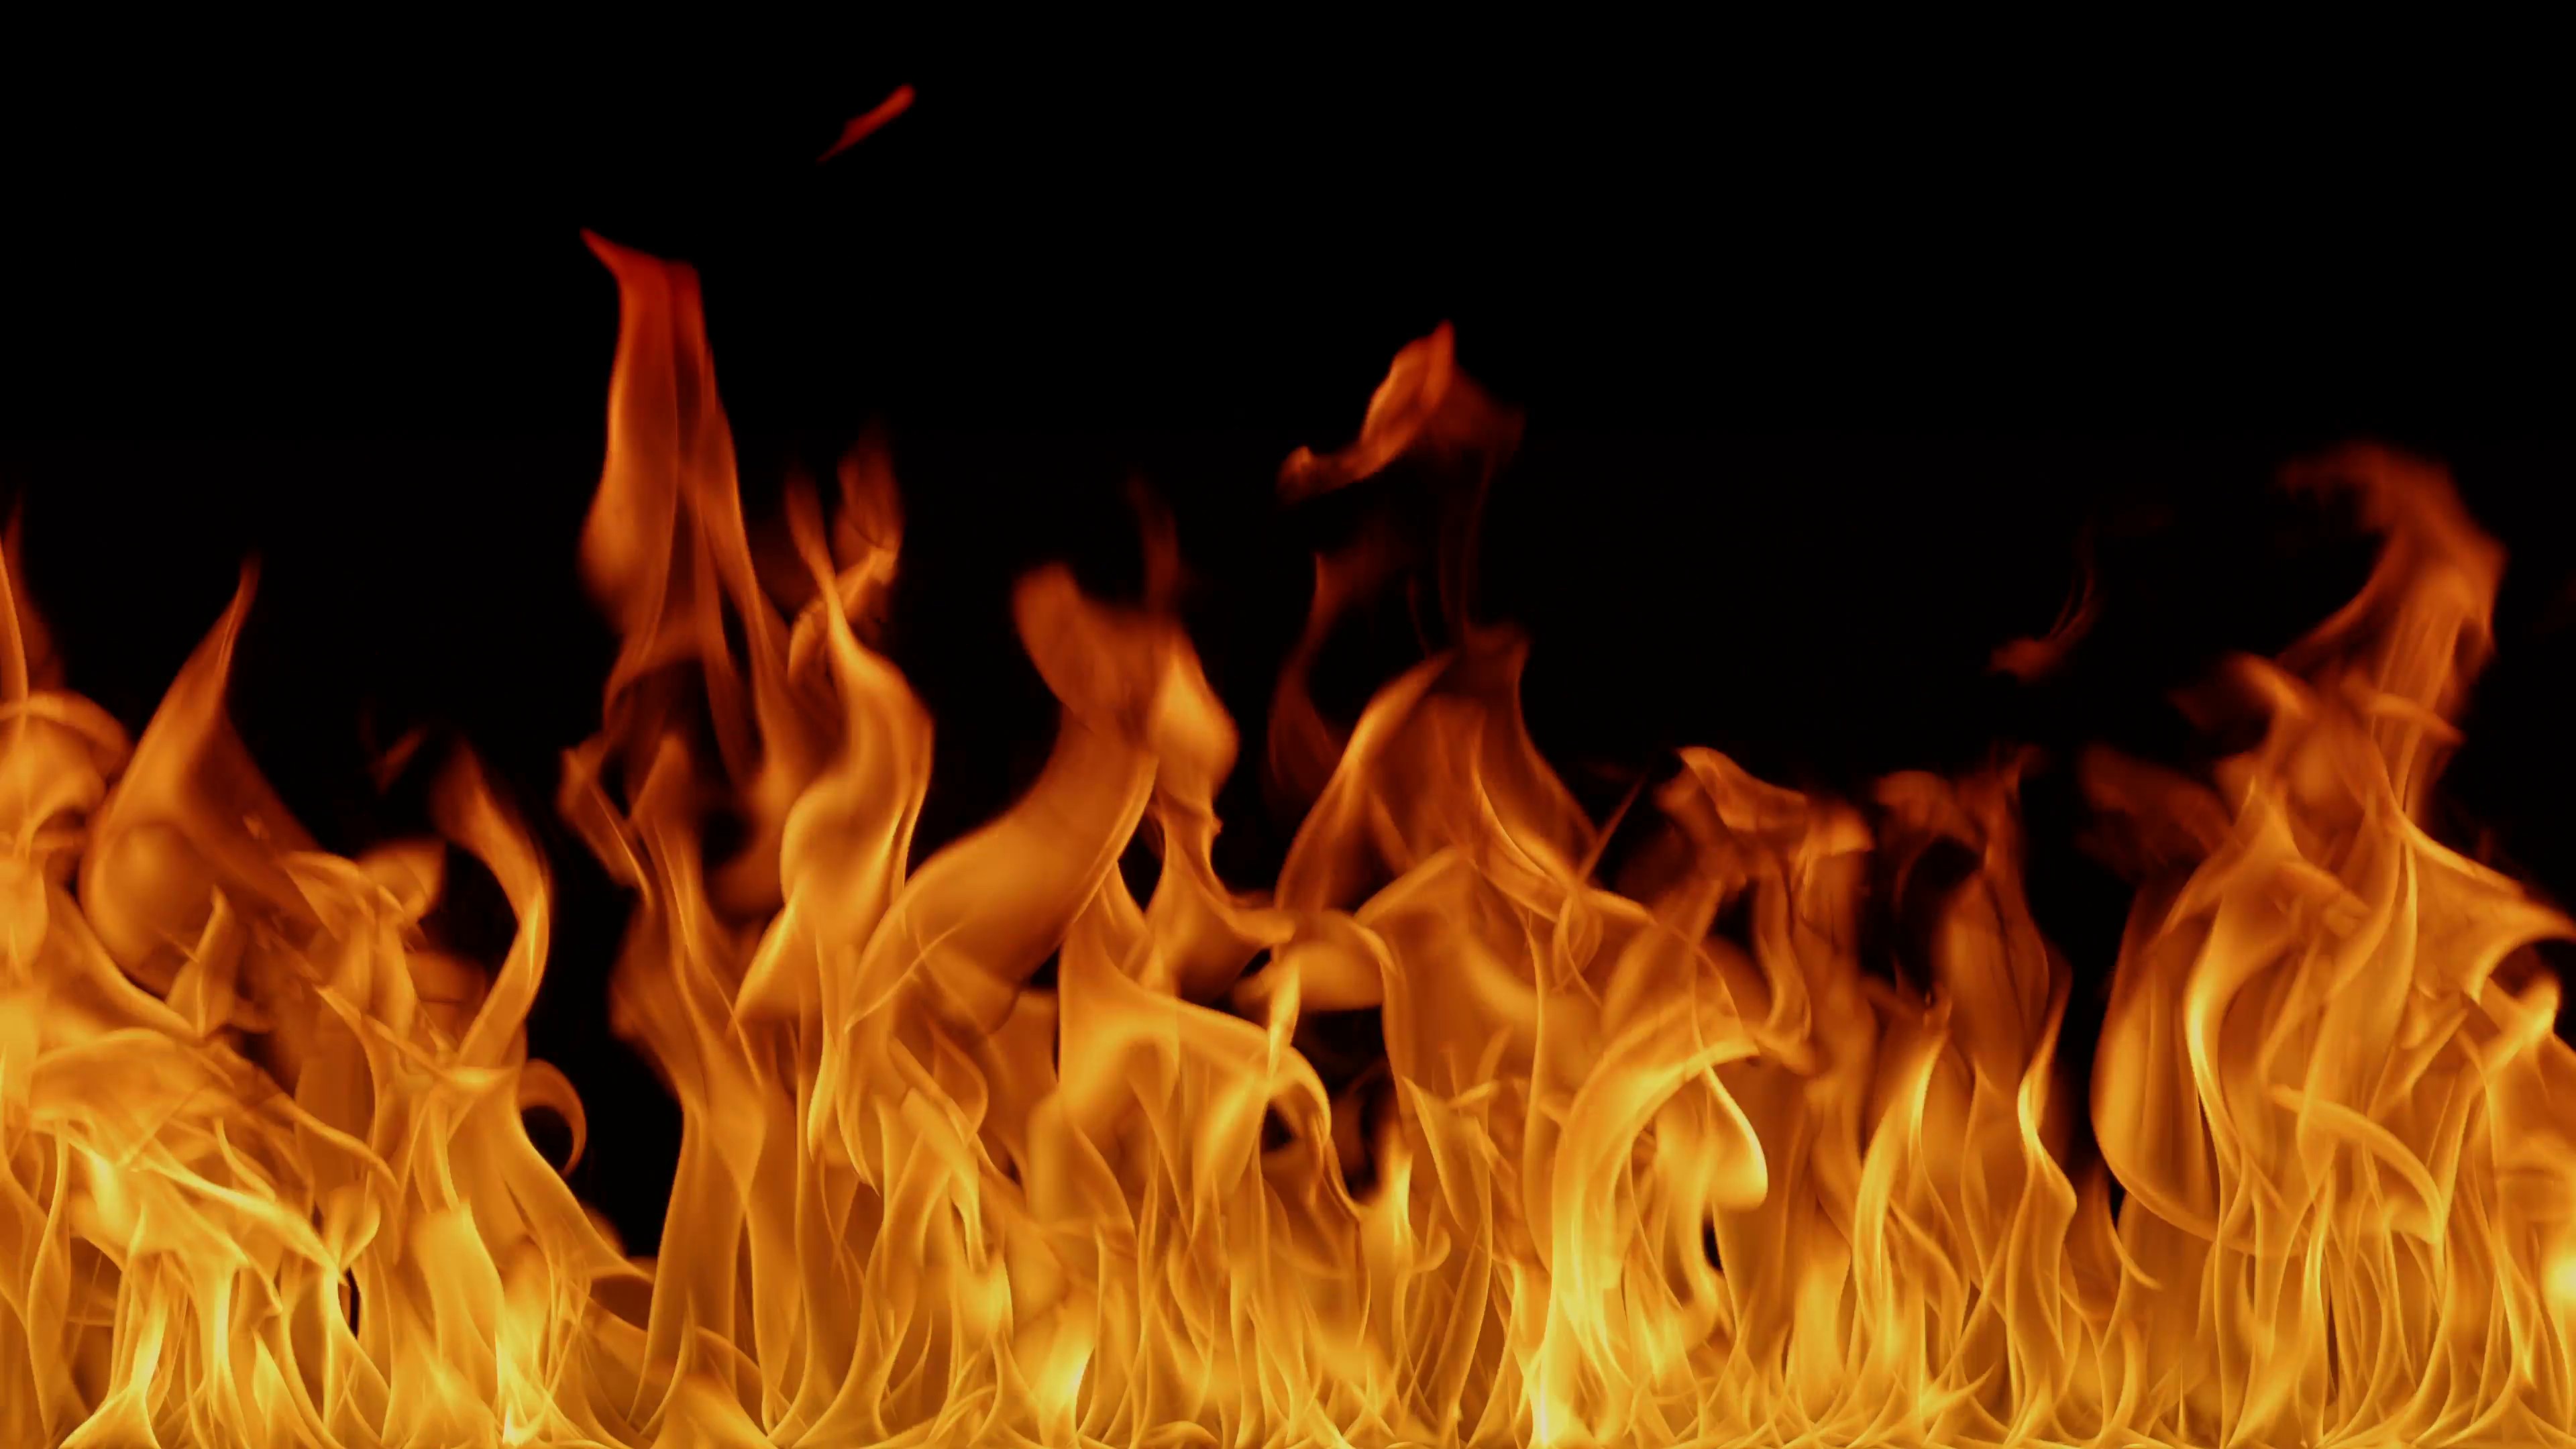  Fire  background   Download free  beautiful wallpapers  for 